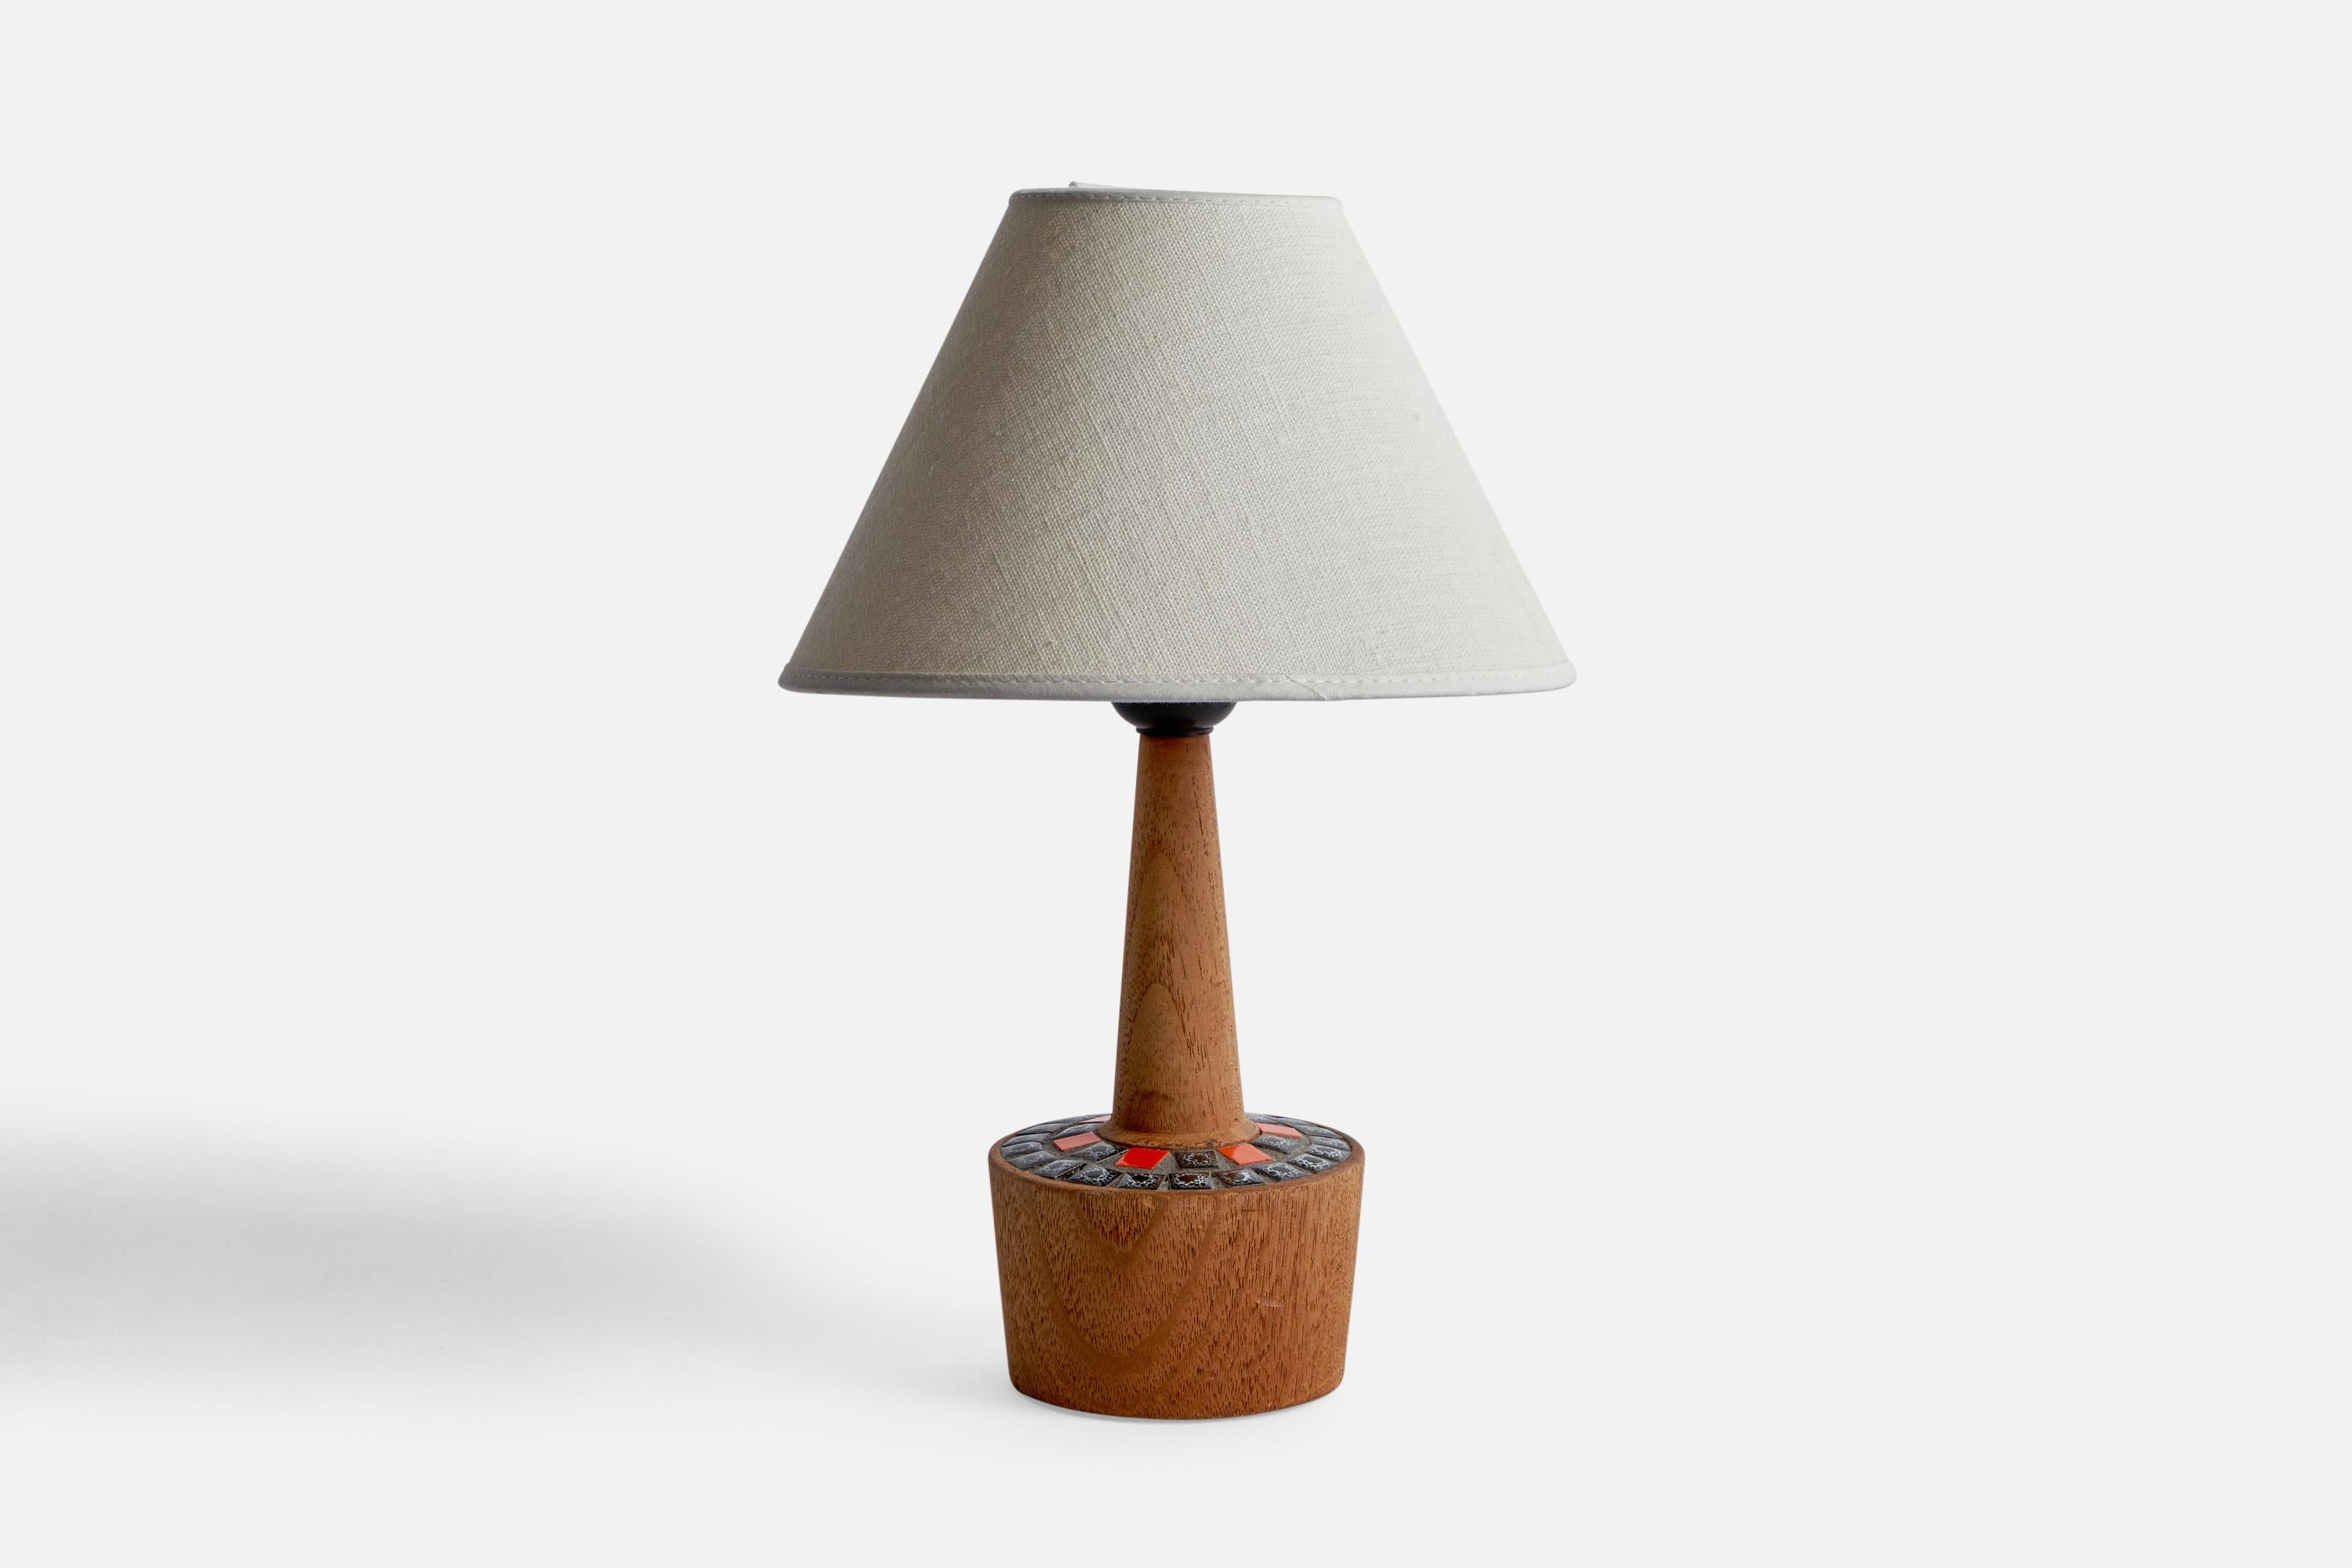 A teak and red and blue ceramic tile table lamp designed and produced in Sweden, 1950s.

Dimensions of Lamp (inches): 8.95” H x 3.84” Diameter
Dimensions of Shade (inches): 3” Top Diameter x 8” Bottom Diameter x 5” H
Dimensions of Lamp with Shade